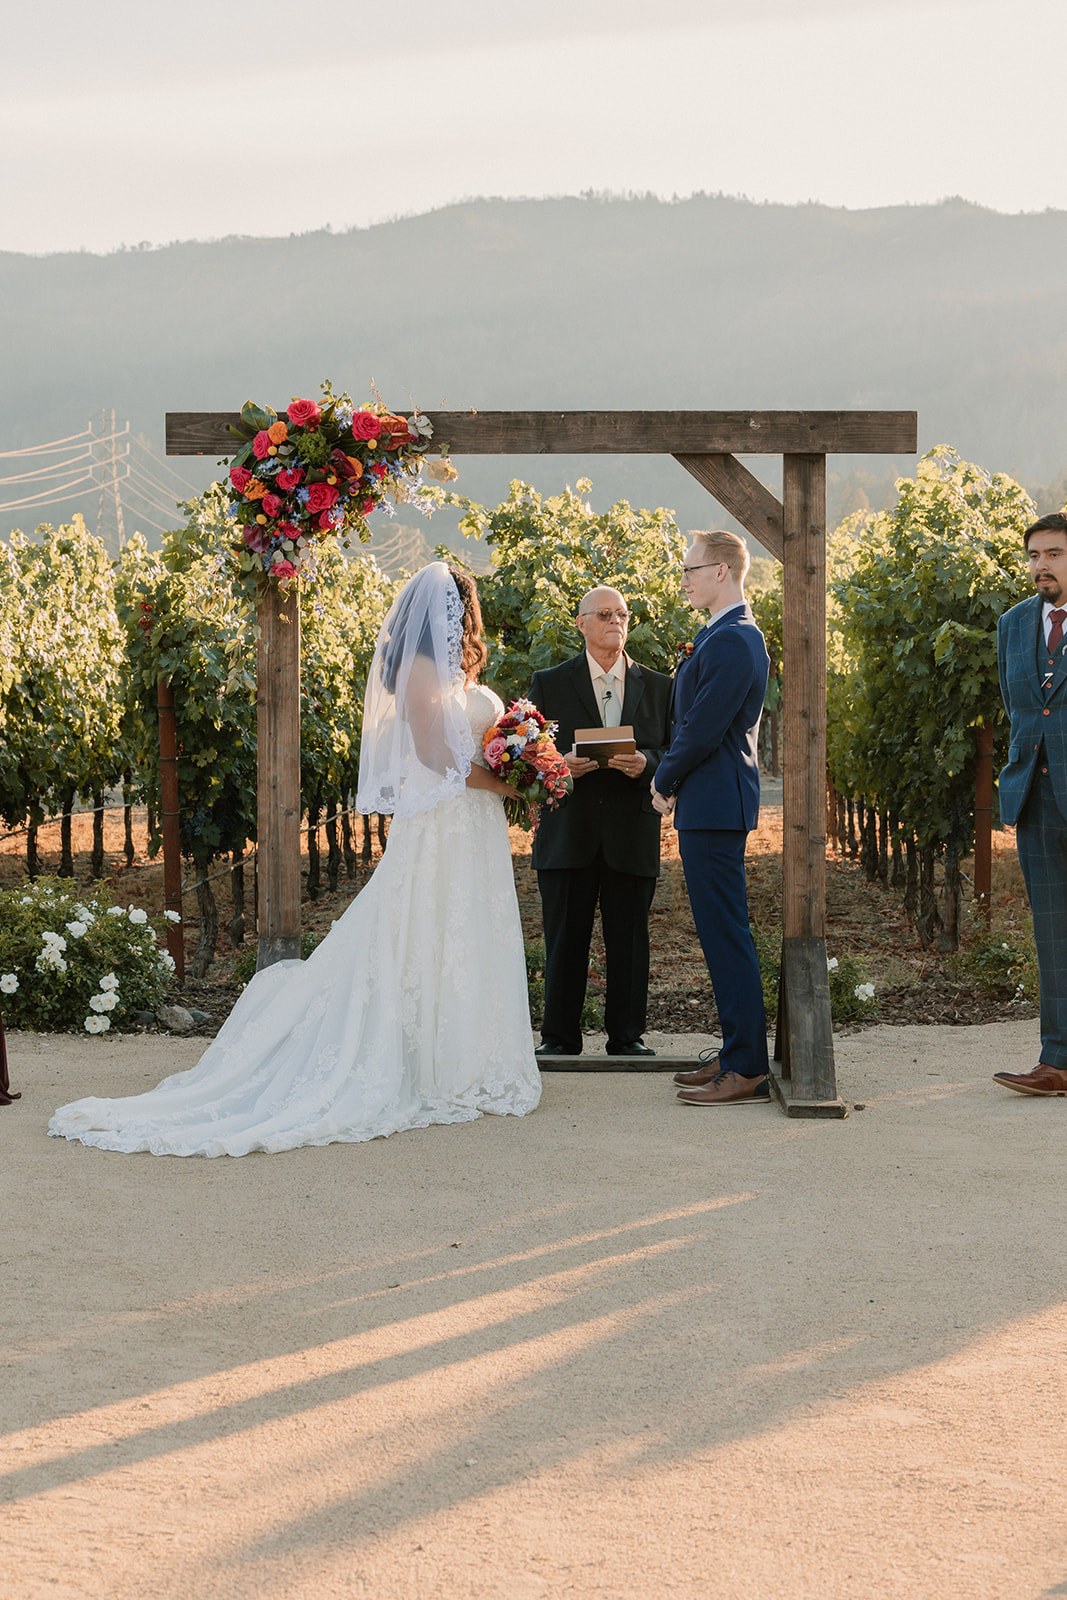 A bride and groom standing at an altar with a clergy member, amidst a vineyard setting during a wedding ceremony at Tre Posti 